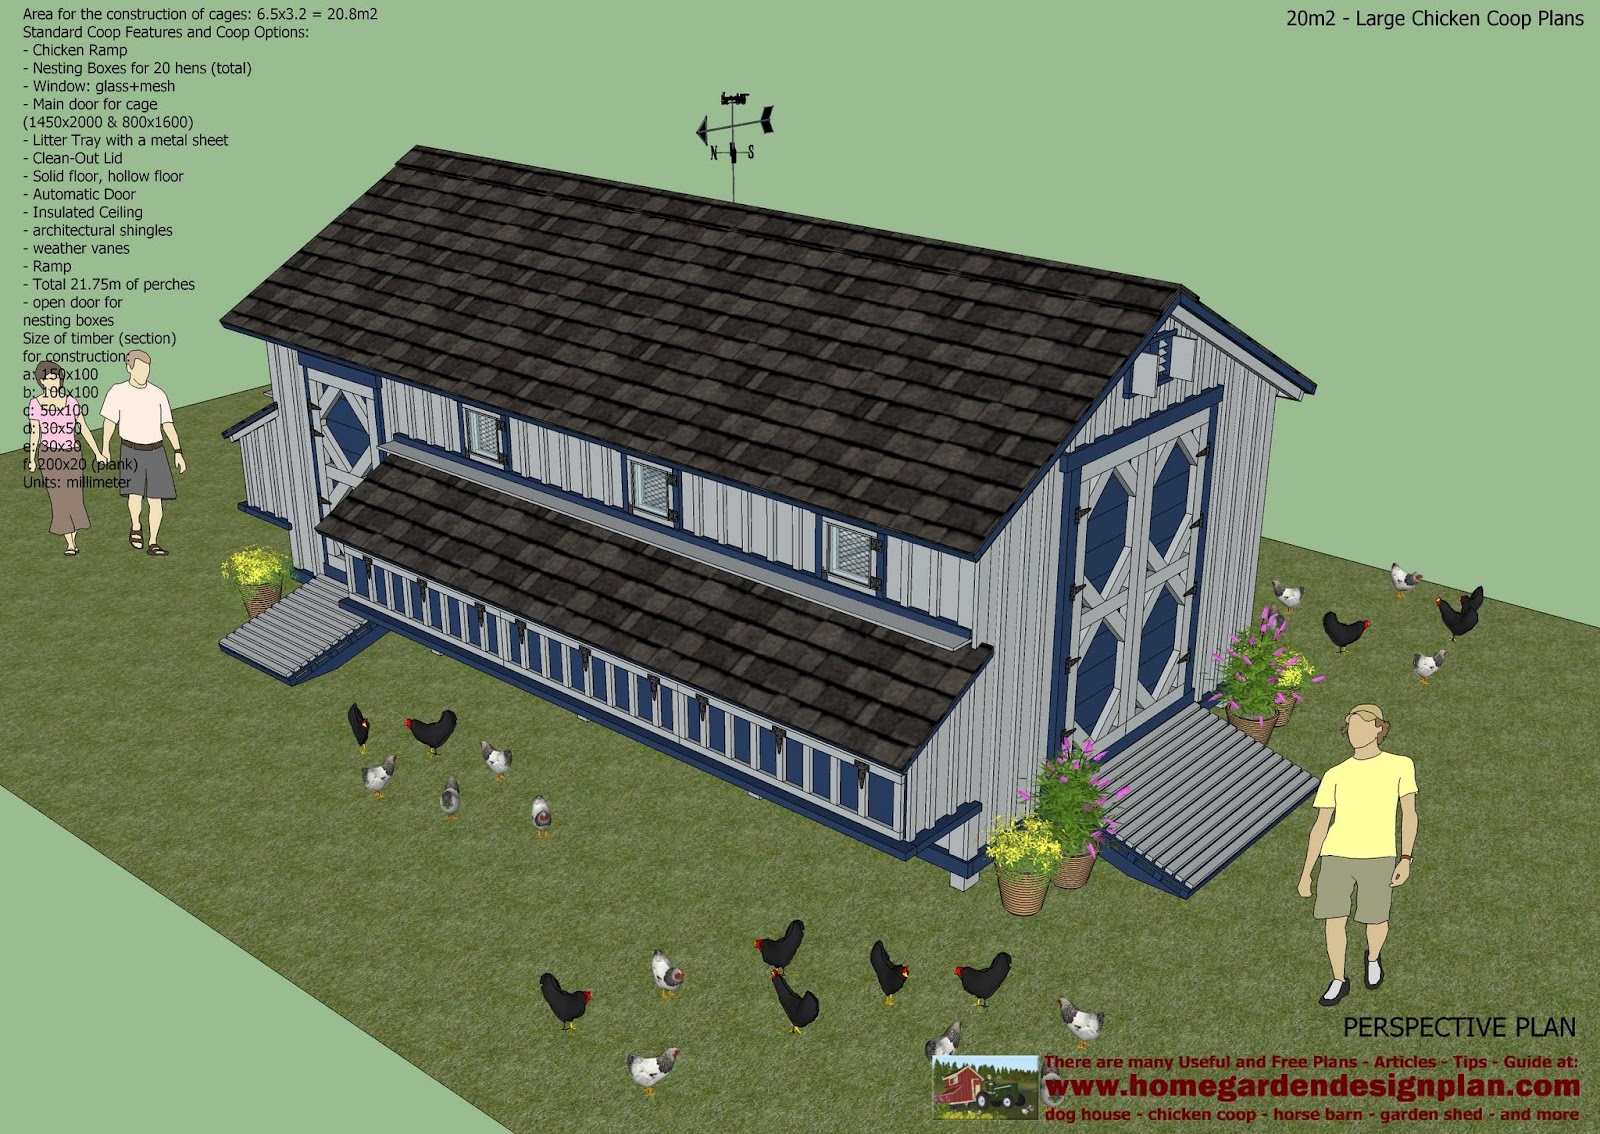 L310 - Large chicken coop plans - Chicken coop design - How to build a ...